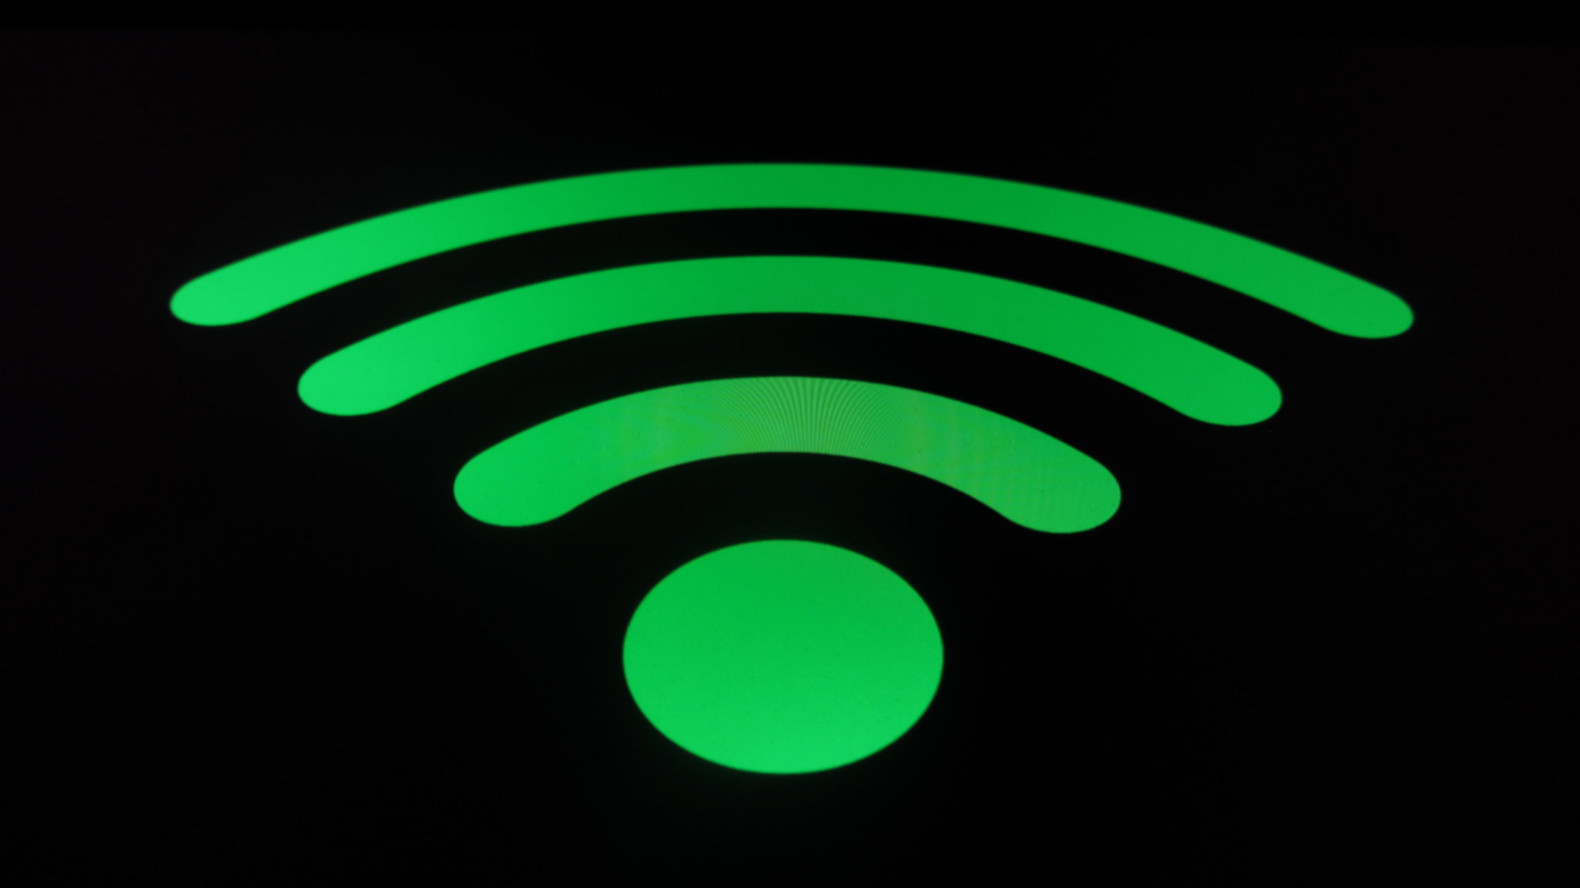 2+MIT+WiFi Six new technologies that will enable faster, better internet to the world